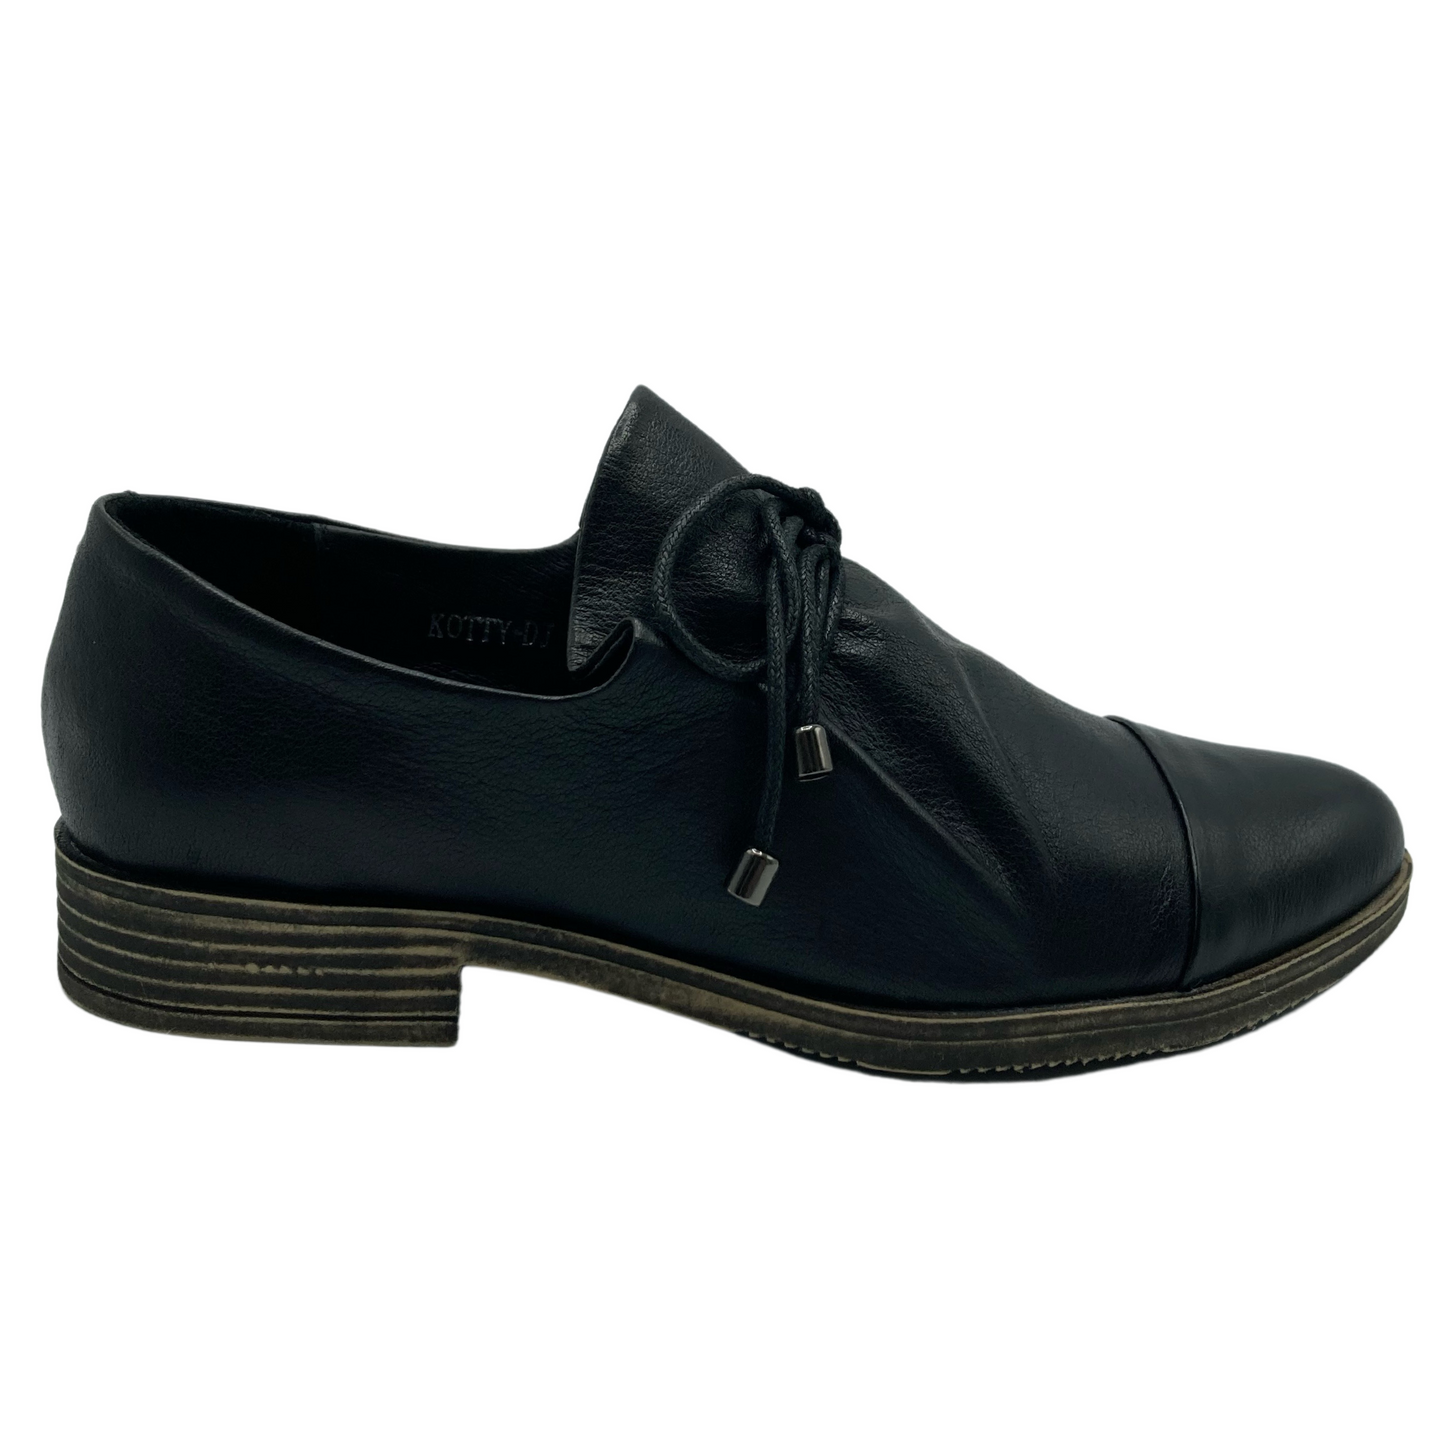 Right facing profile view of black leather shoe with black laces and 0.8 inch heel